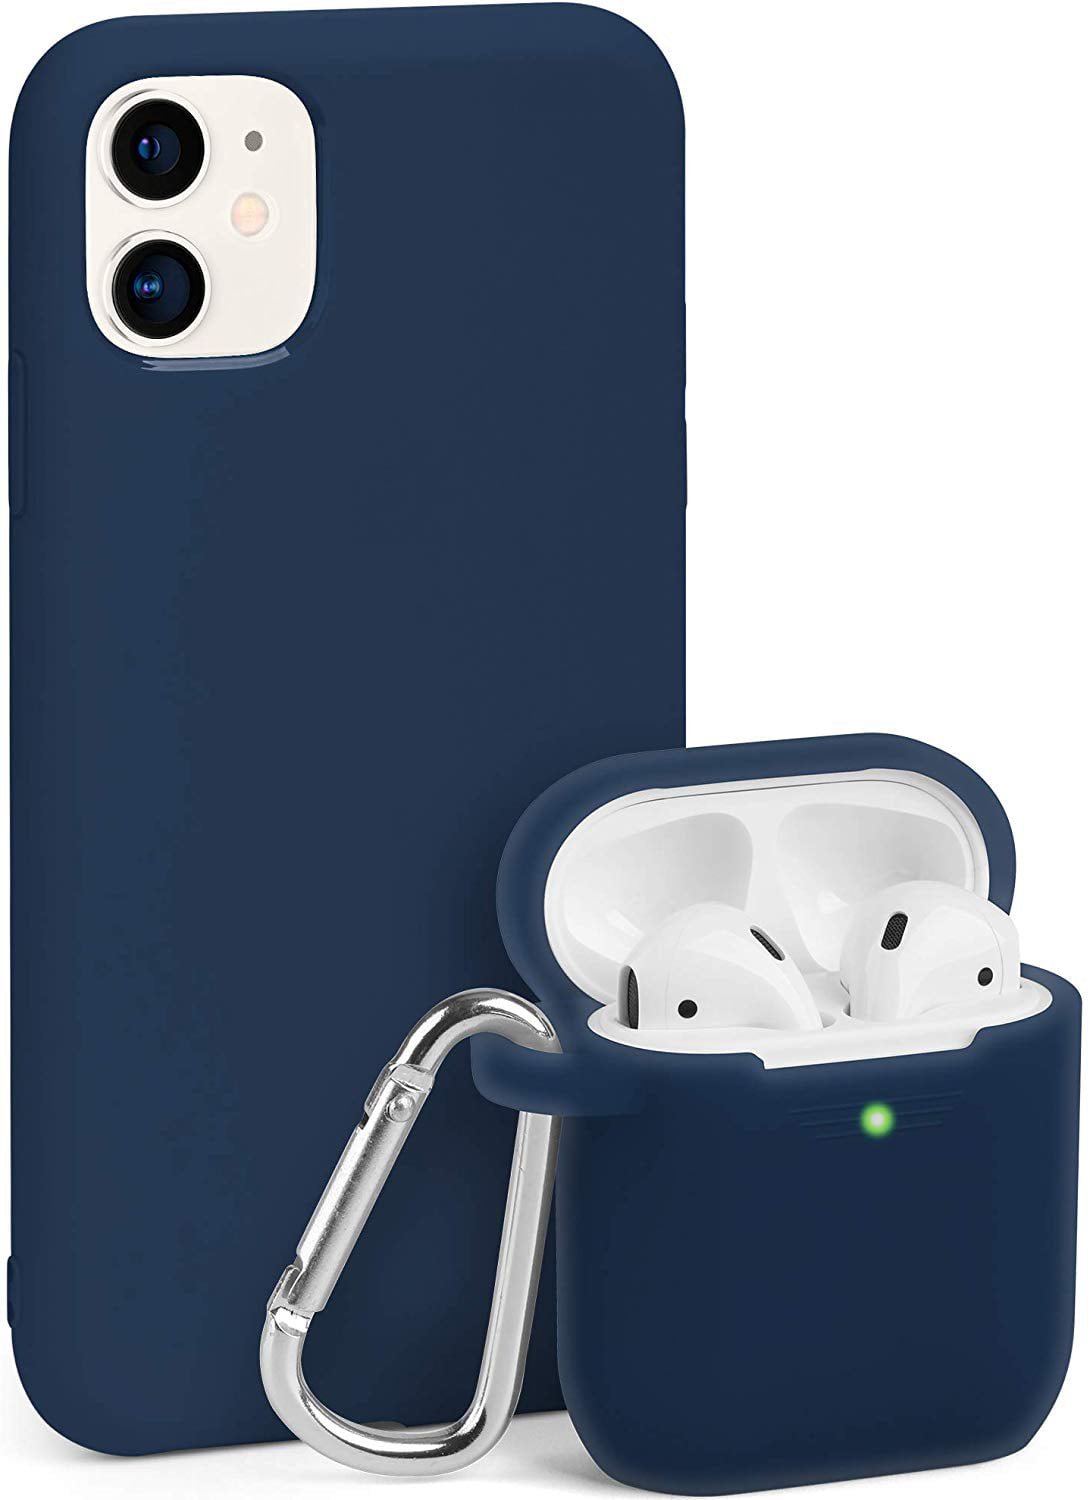 iPhone 11 Case and Airpods Case Same Color Bundle Silicone Thin Smooth Full Covered [Enhanced Camera Protection] GMYLE for Apple iPhone 11 6.1" with Airpods 1, 2 (Navy - Walmart.com